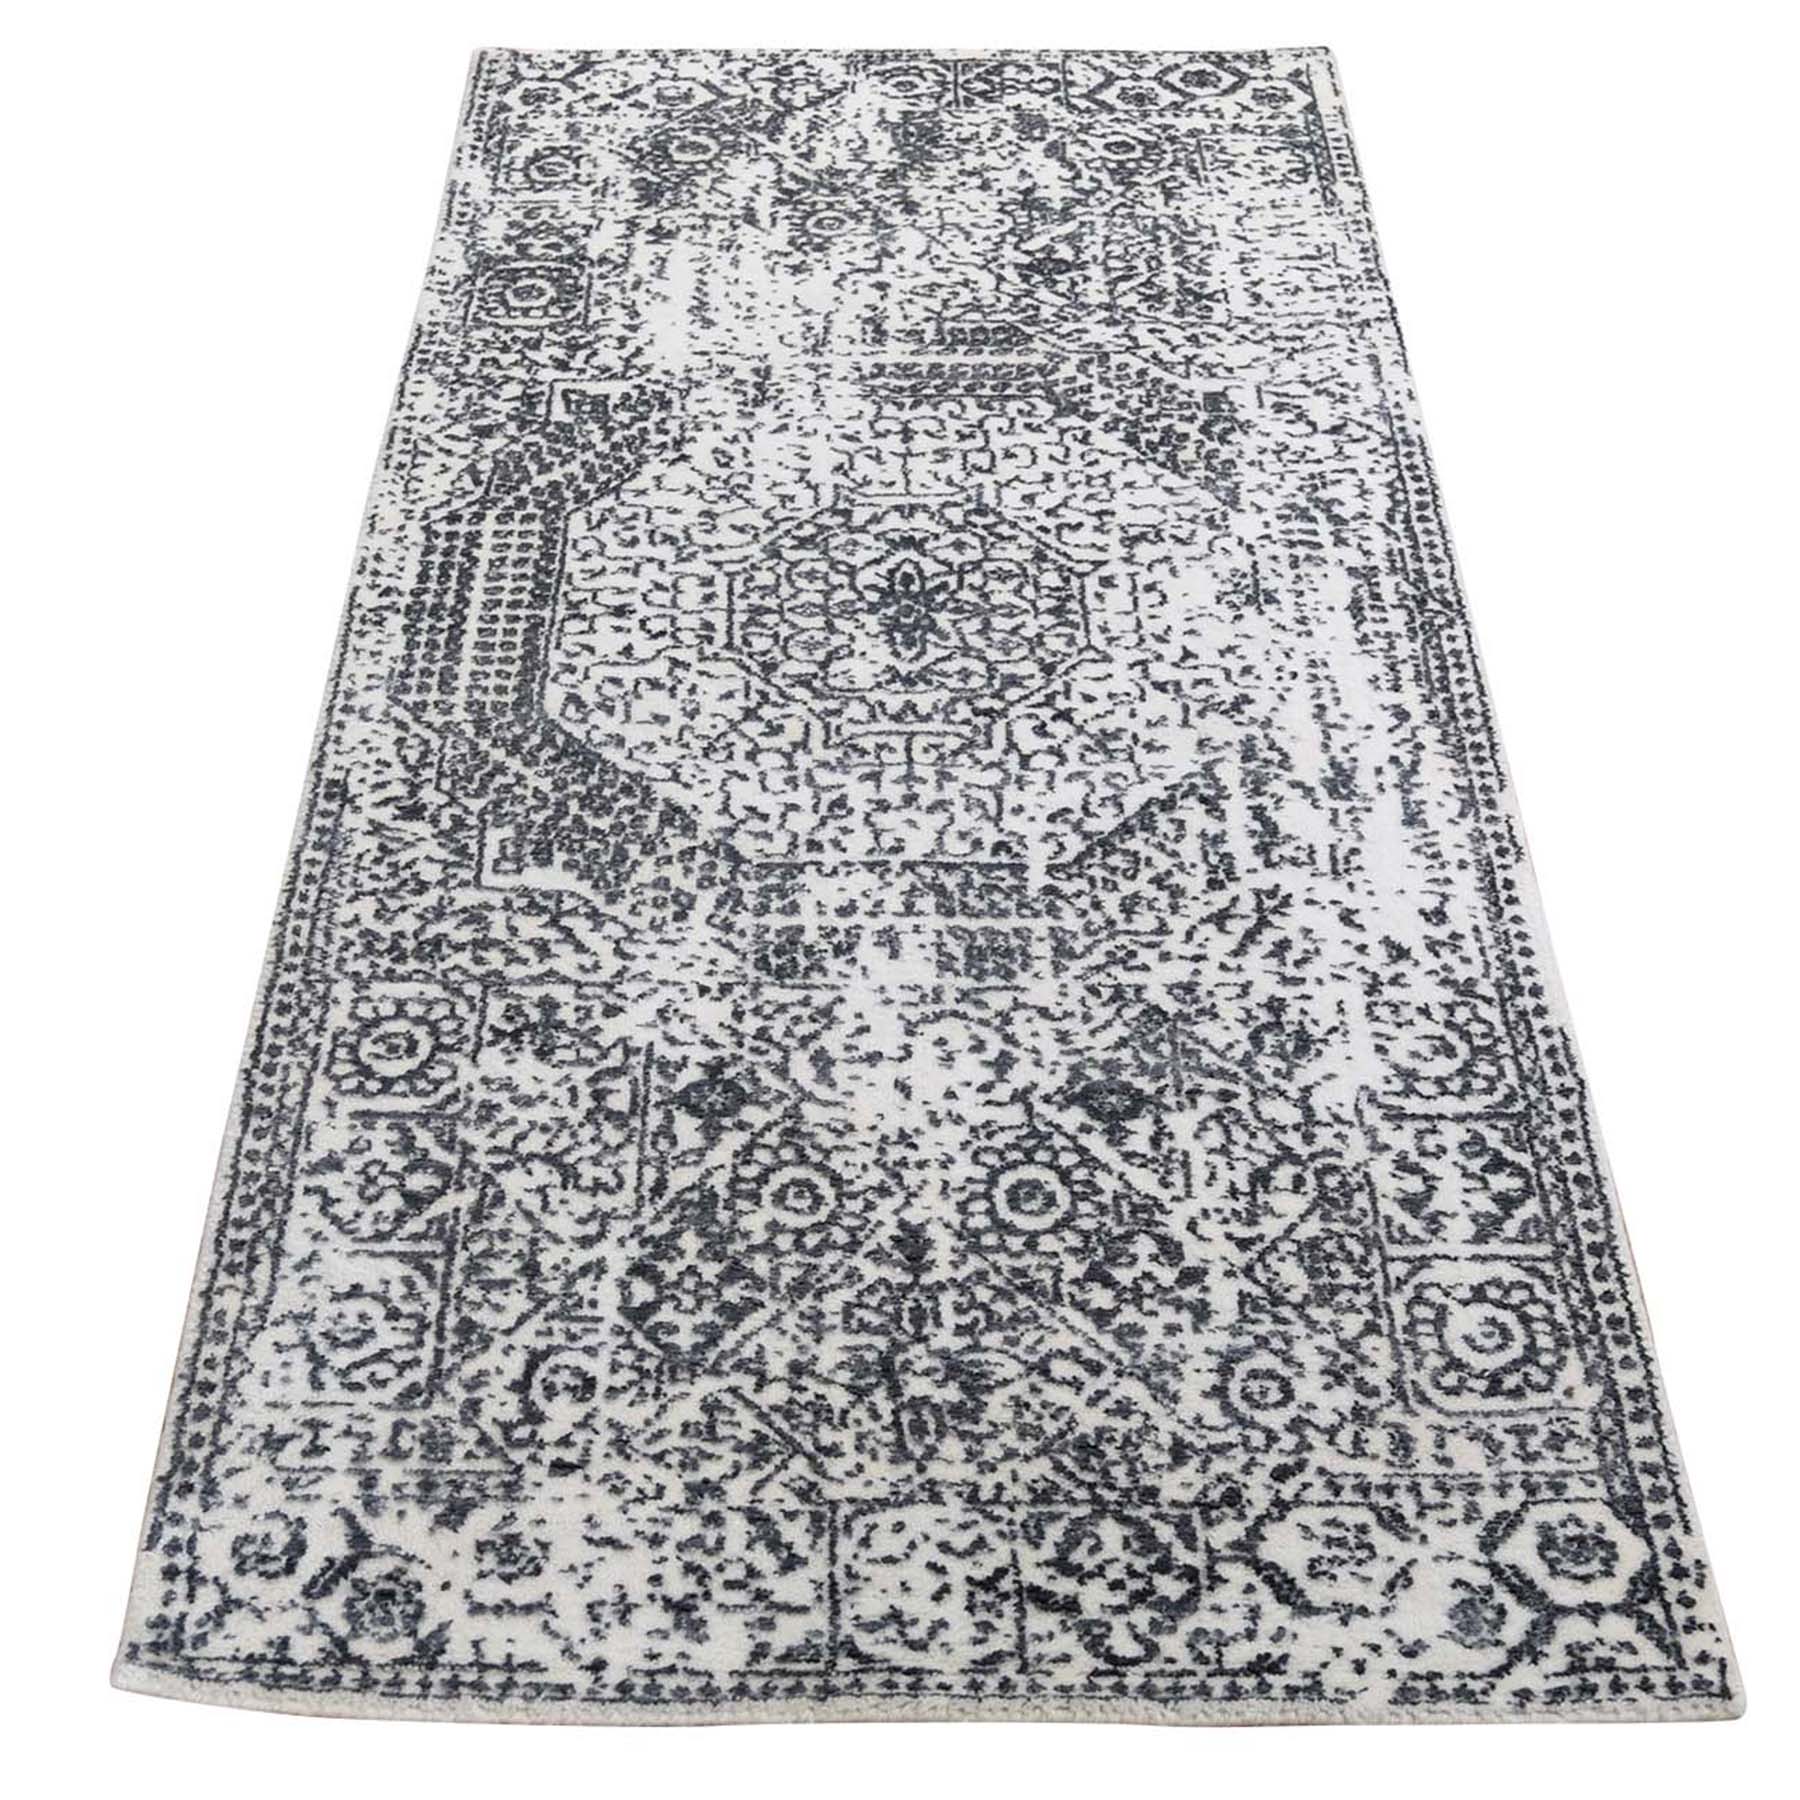 Transitional Silk Hand-Woven Area Rug 2'5